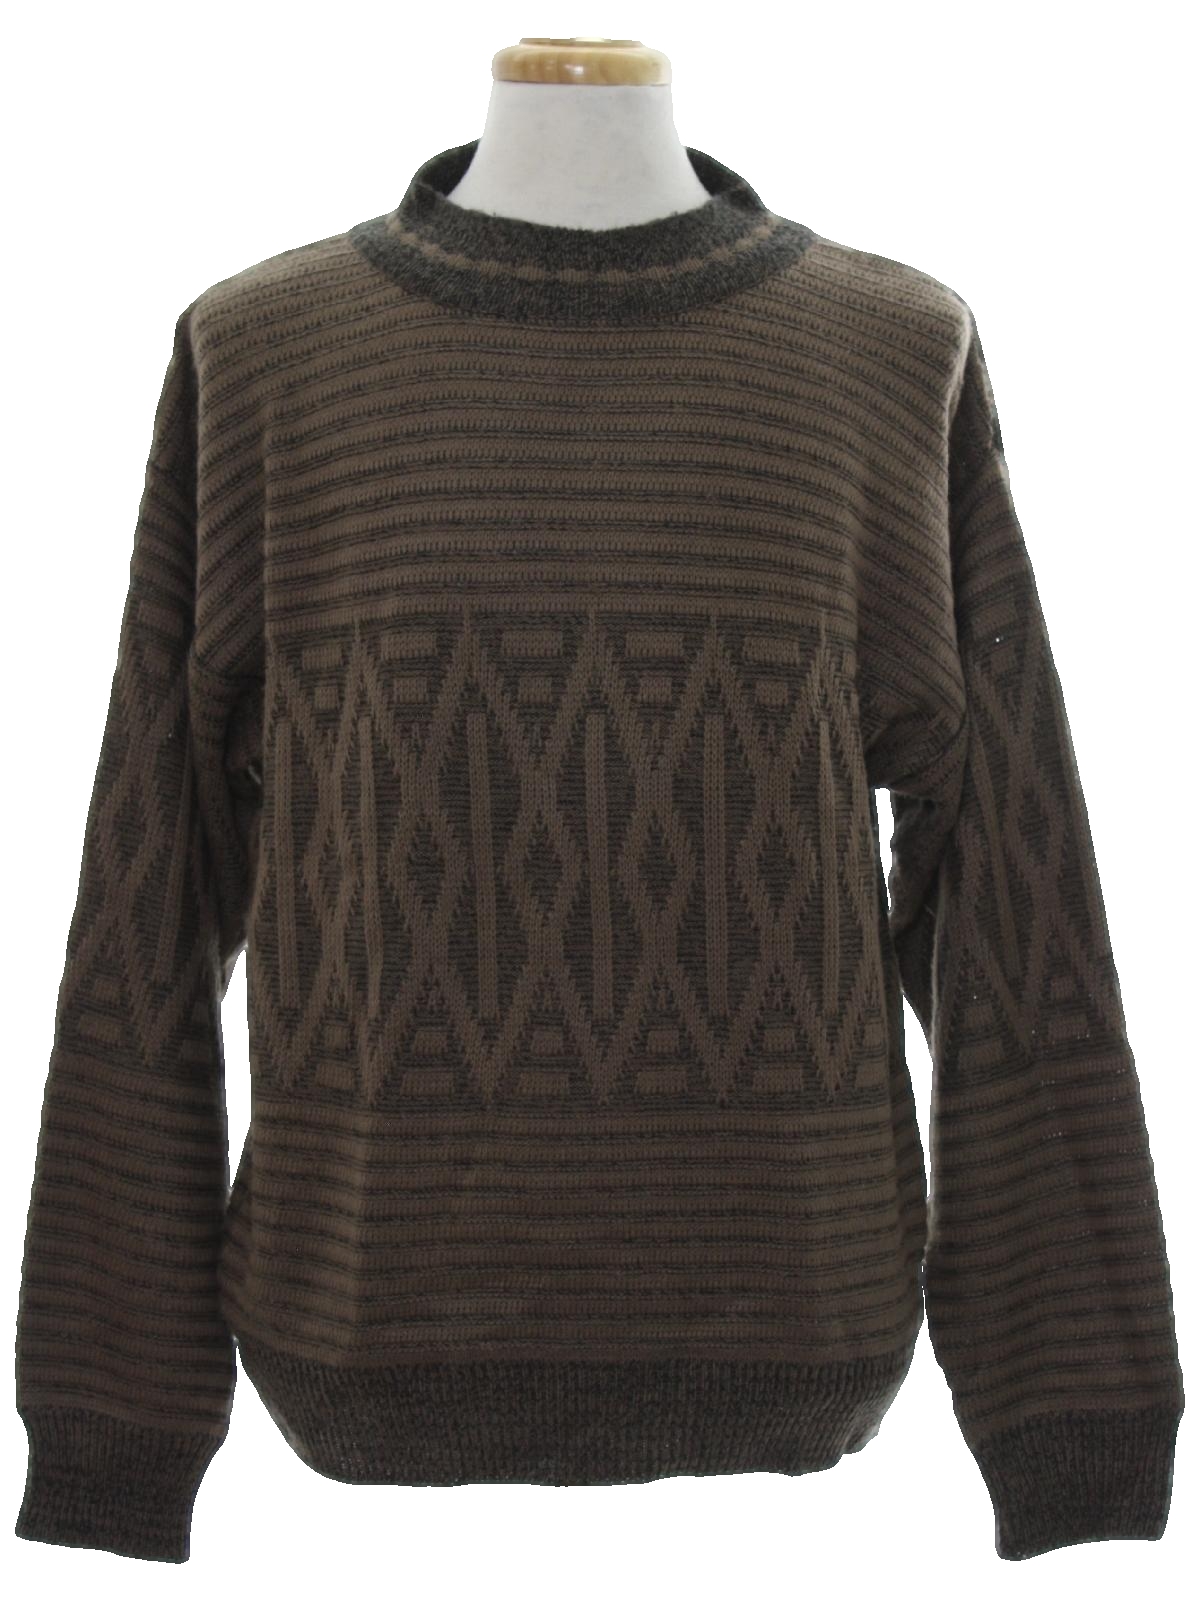 Retro 1980s Sweater: Late 80s or Early 90s -Spettro- Mens taupe and ...